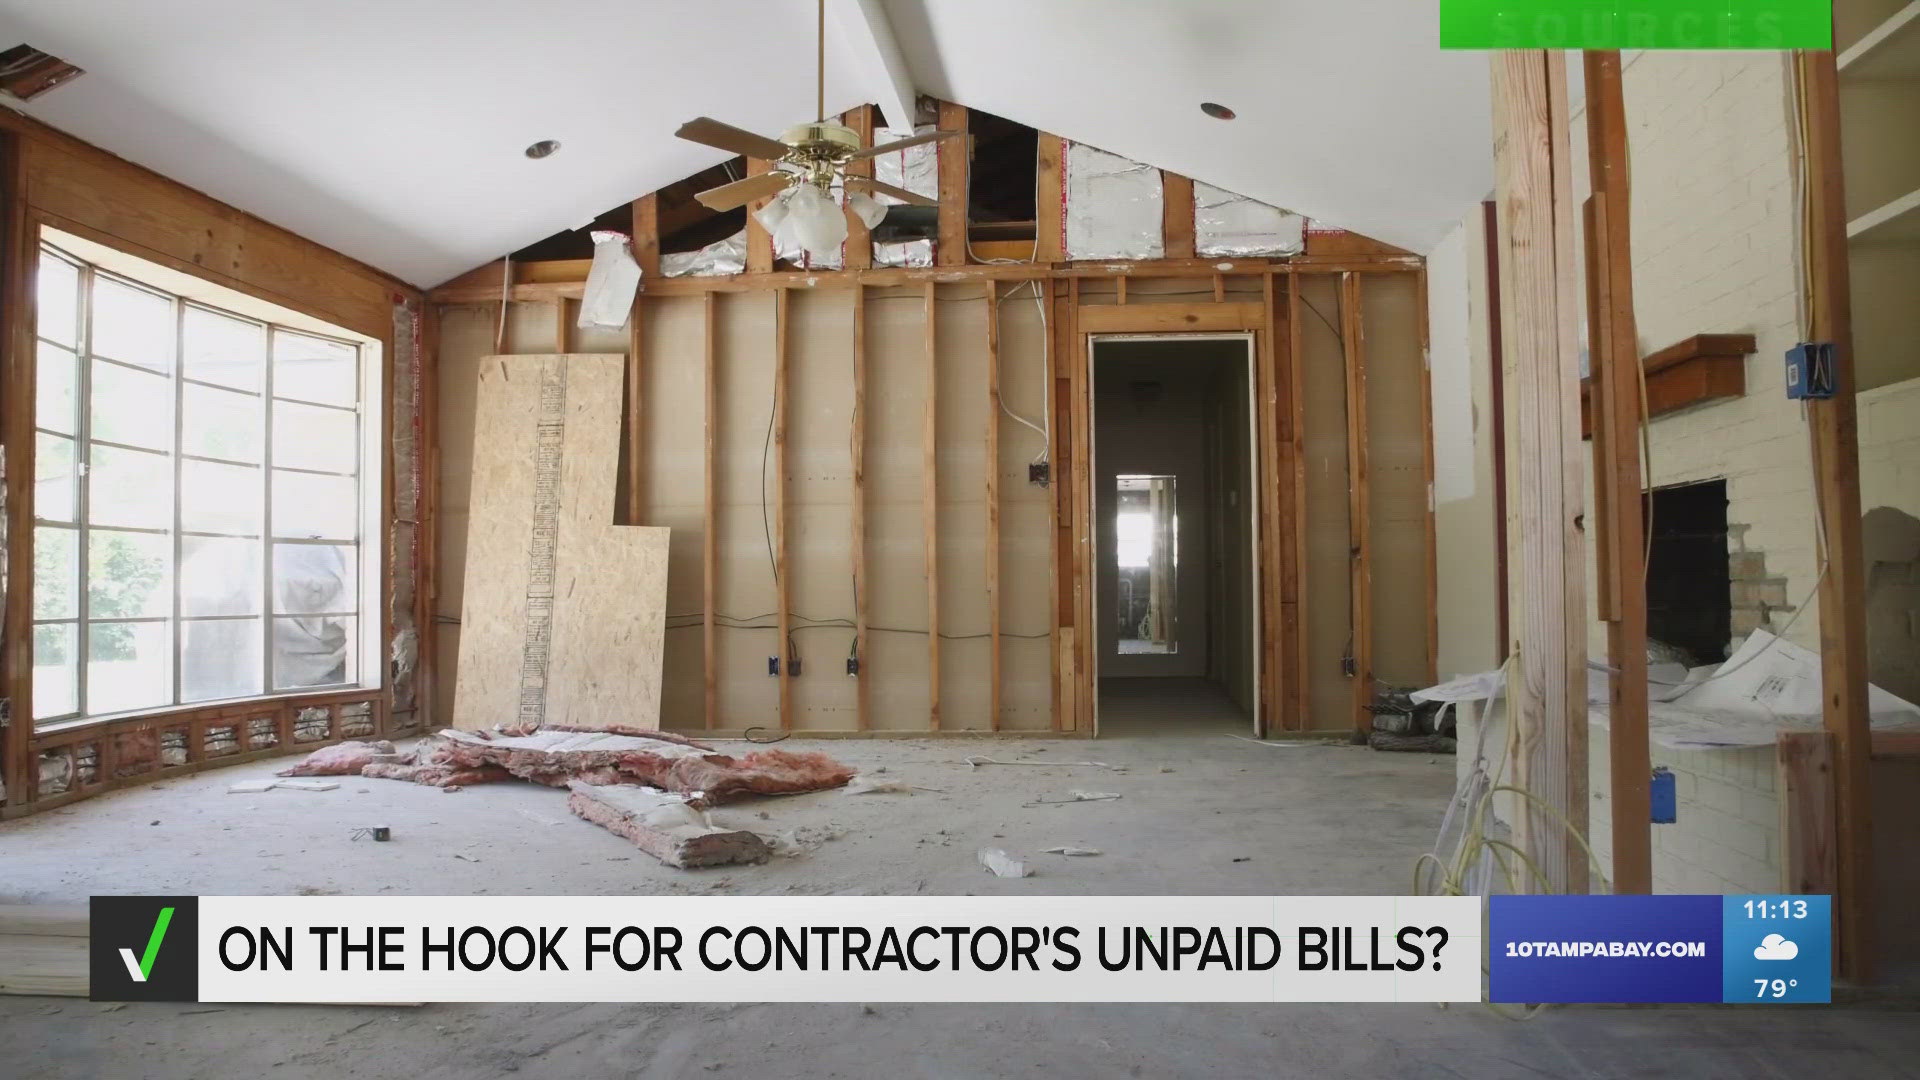 The law allows suppliers and subcontractors to go after homeowners if contractors they hire don’t pay their bills.